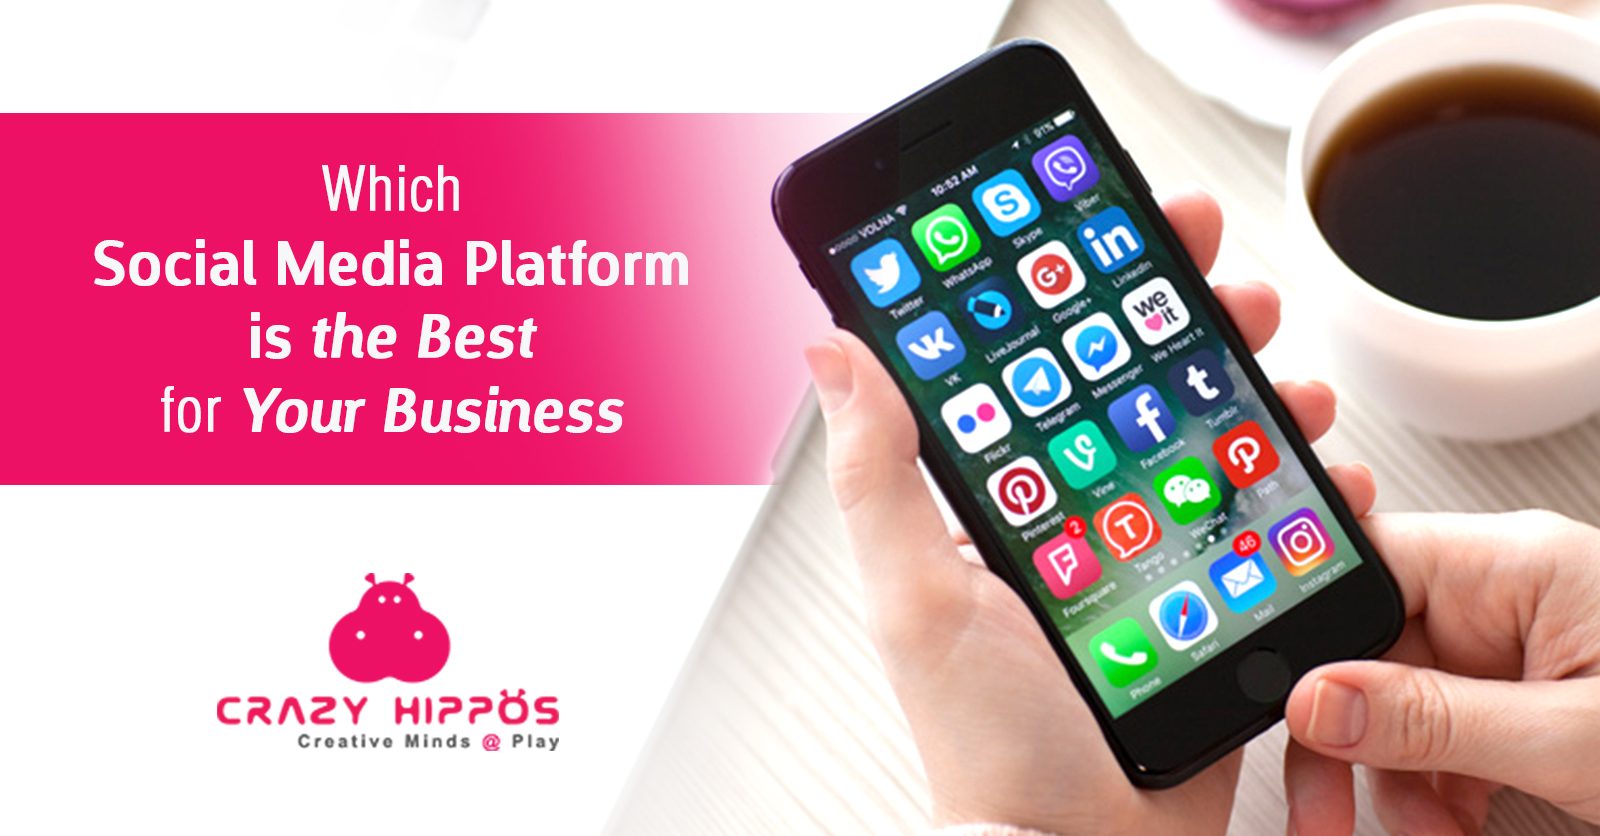 WHICH SOCIAL MEDIA PLATFORM IS THE BEST FOR YOUR BUSINESS